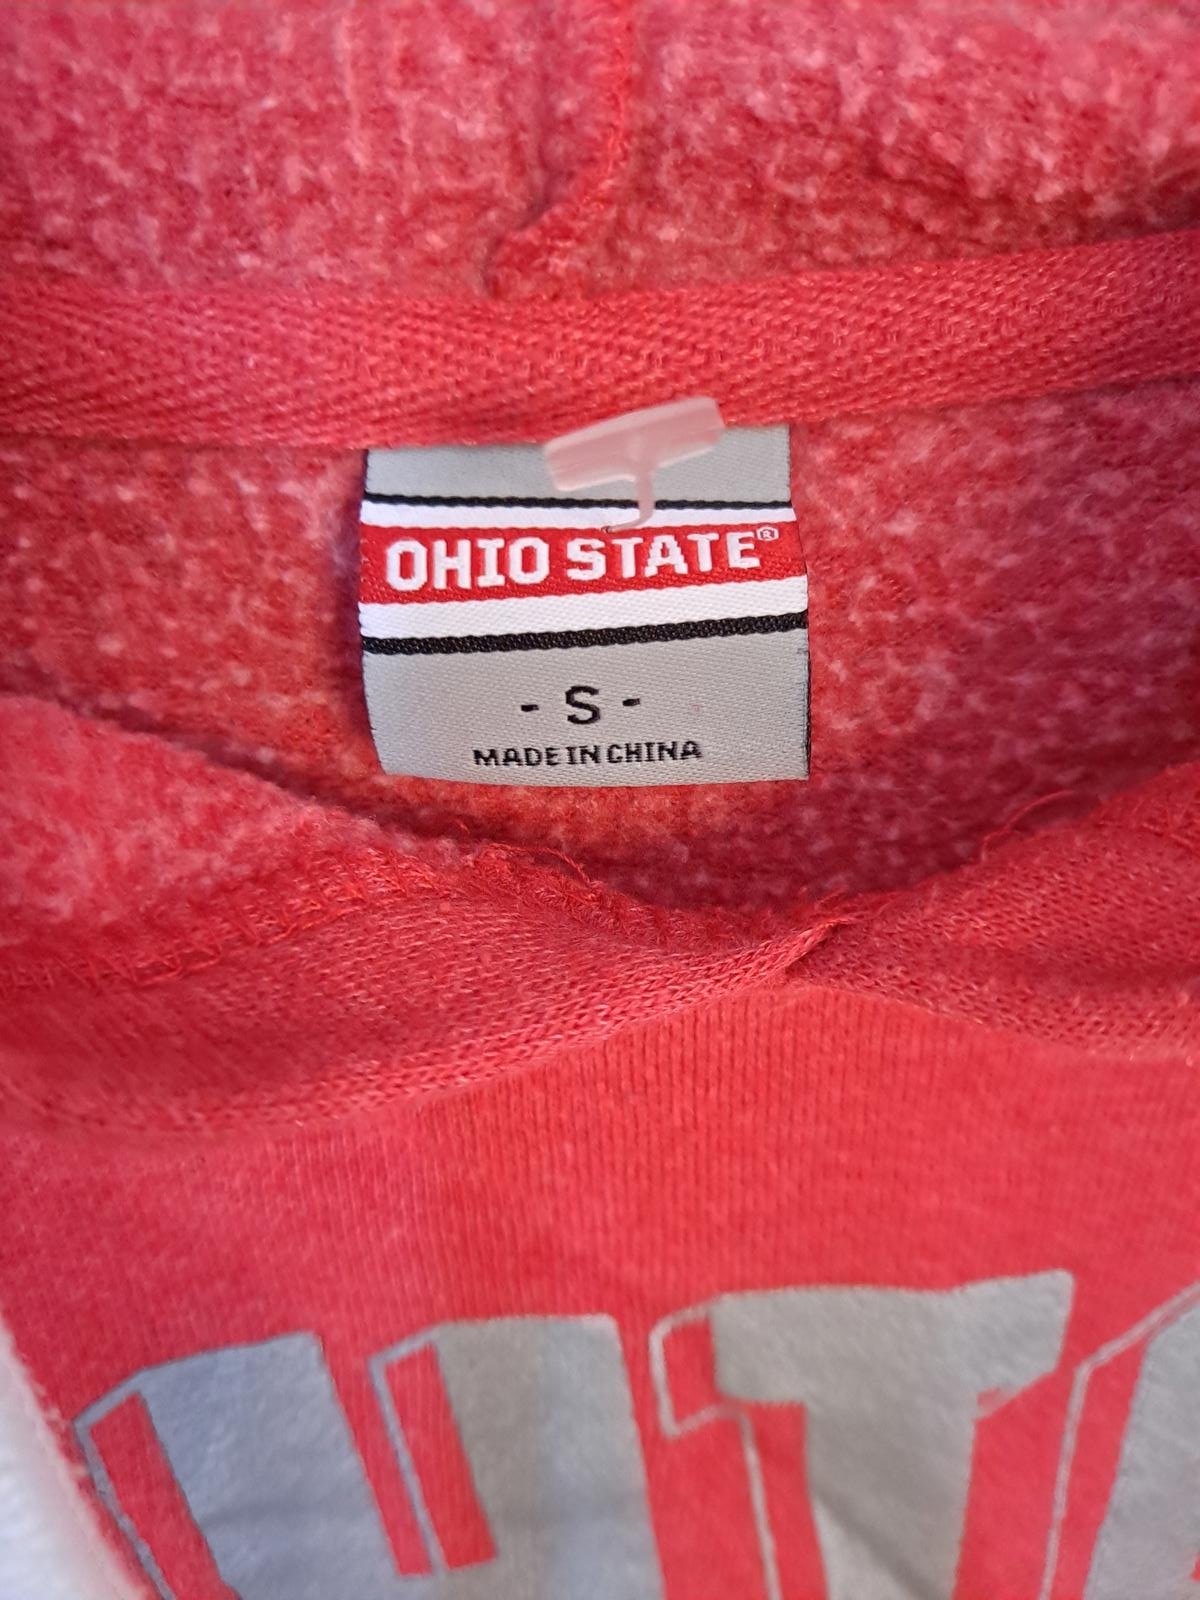 Authentic Ohio State Red and White Hoodie Sweatshirt Size Small pAUrxwChs online store